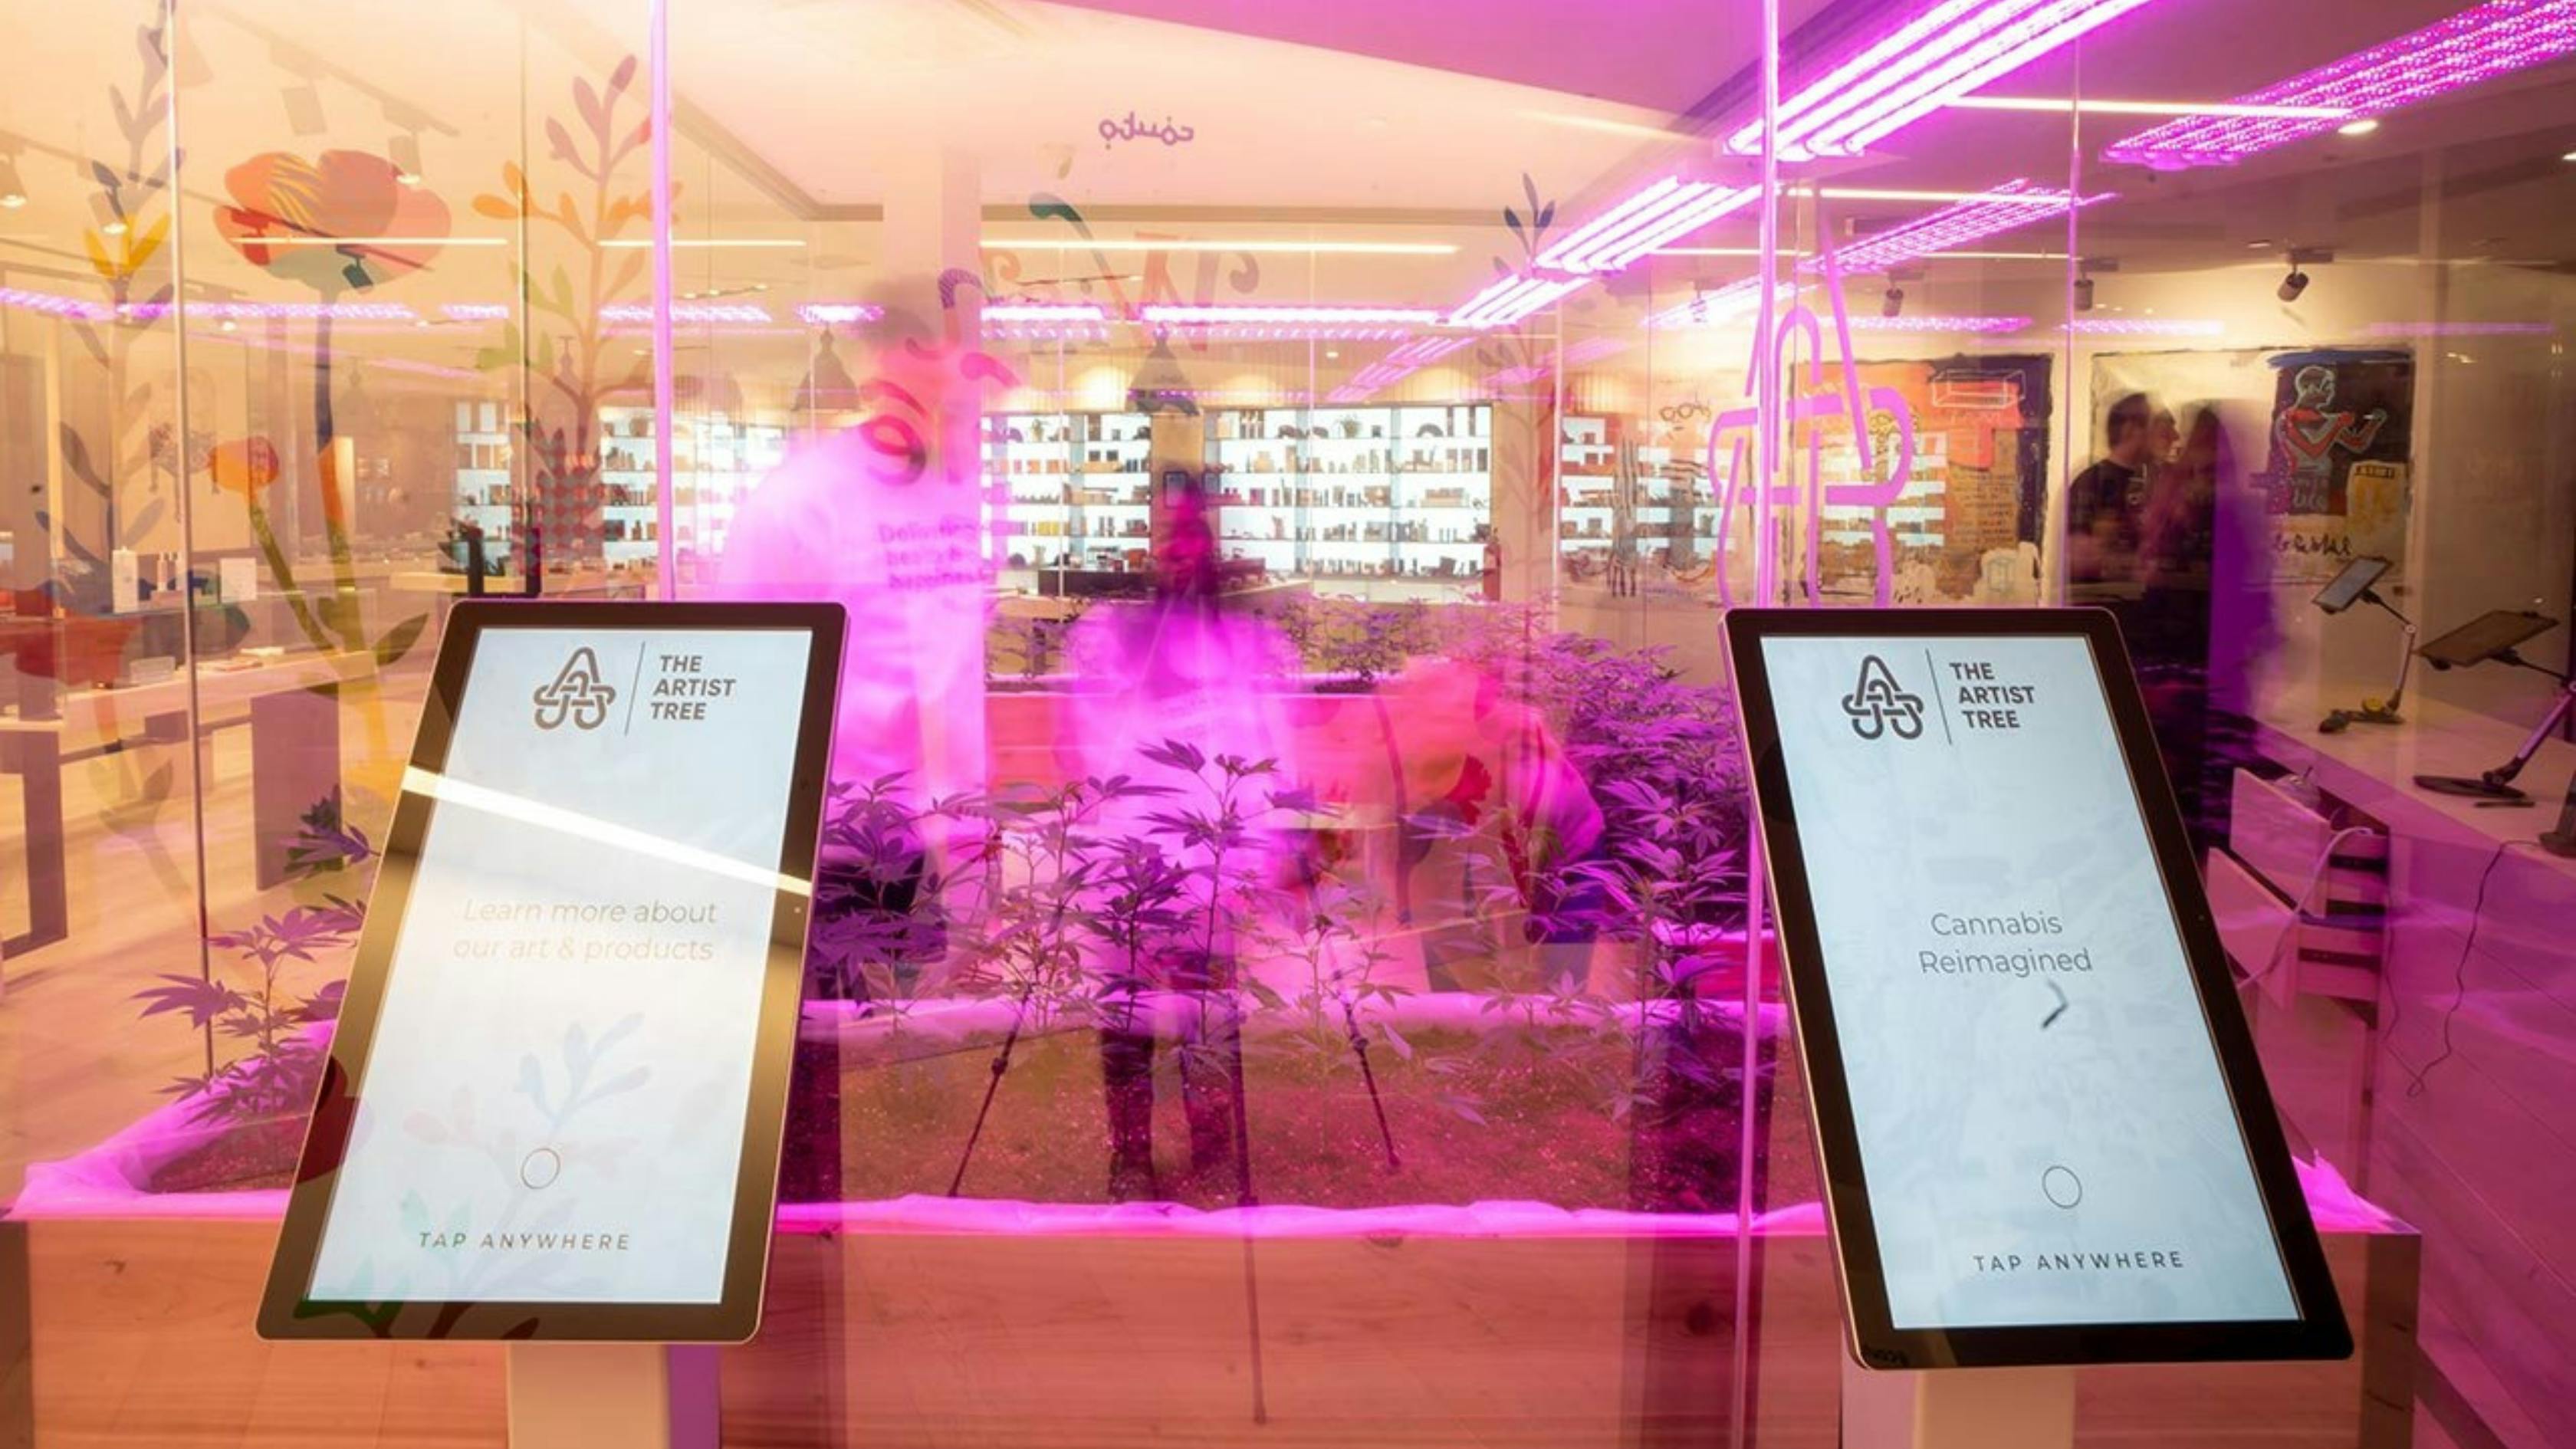 Two education tablets are shown with the dispensary's logo and messages like 
"learn more about our art and products" and "cannabis reimagined" - behind the tablets is a glass display case in the center of the dispensary, growing cannabis plants as customers look on